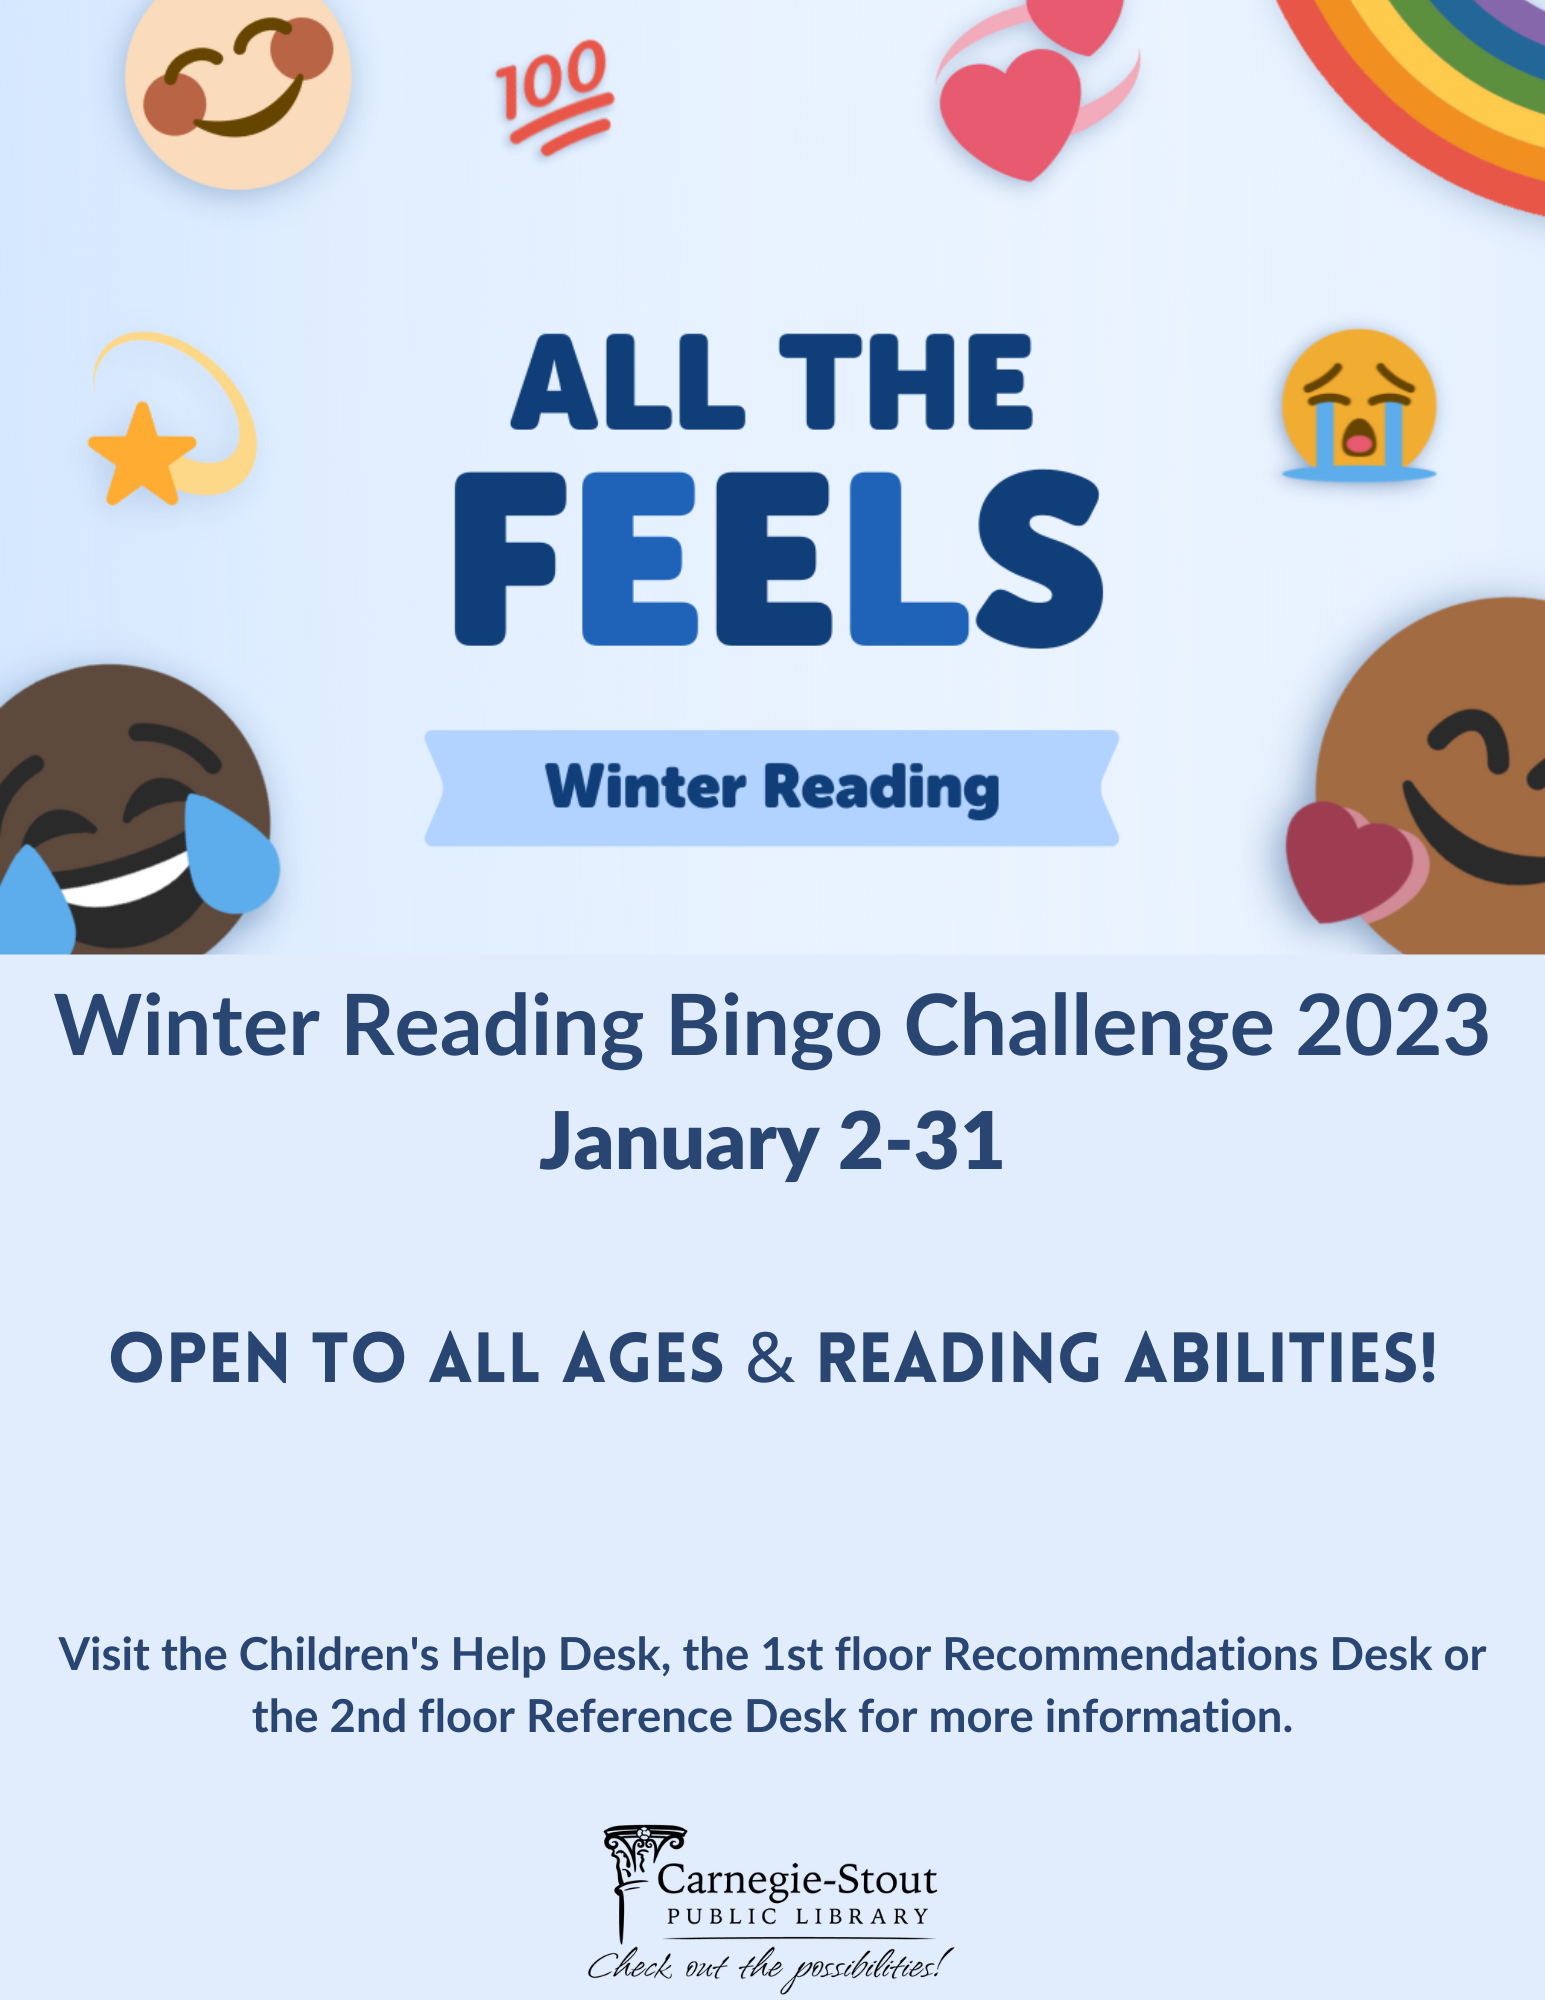 All the feels winter reading bingo. January 2-31. Open to all ages and reading abilities. Blue background with a variety of emoji images.